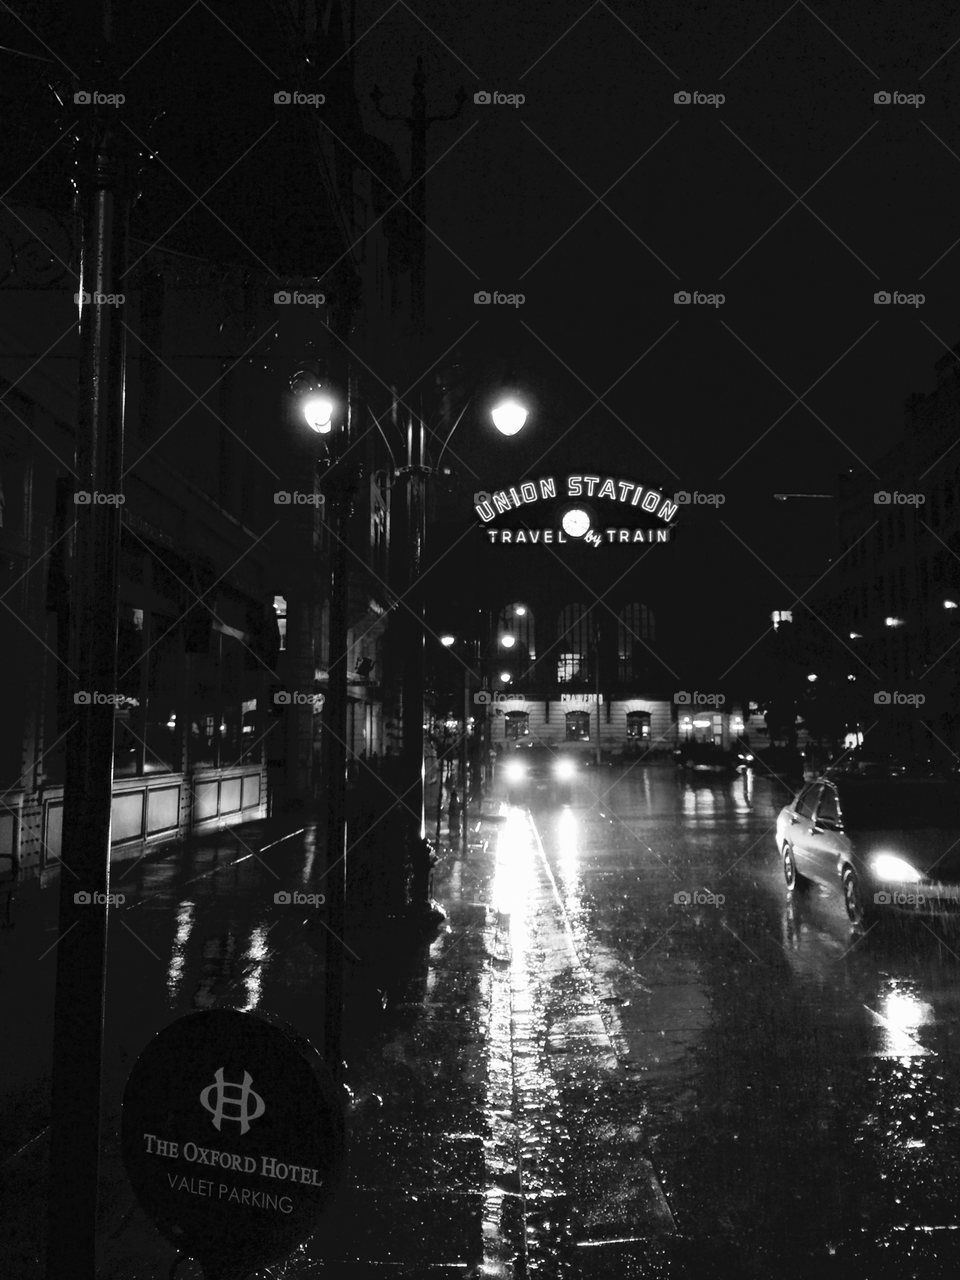 TRAVEL by TRAIN Even in the Rain . Rainy night in front of Union Station in Downtown Denver, Colorado.